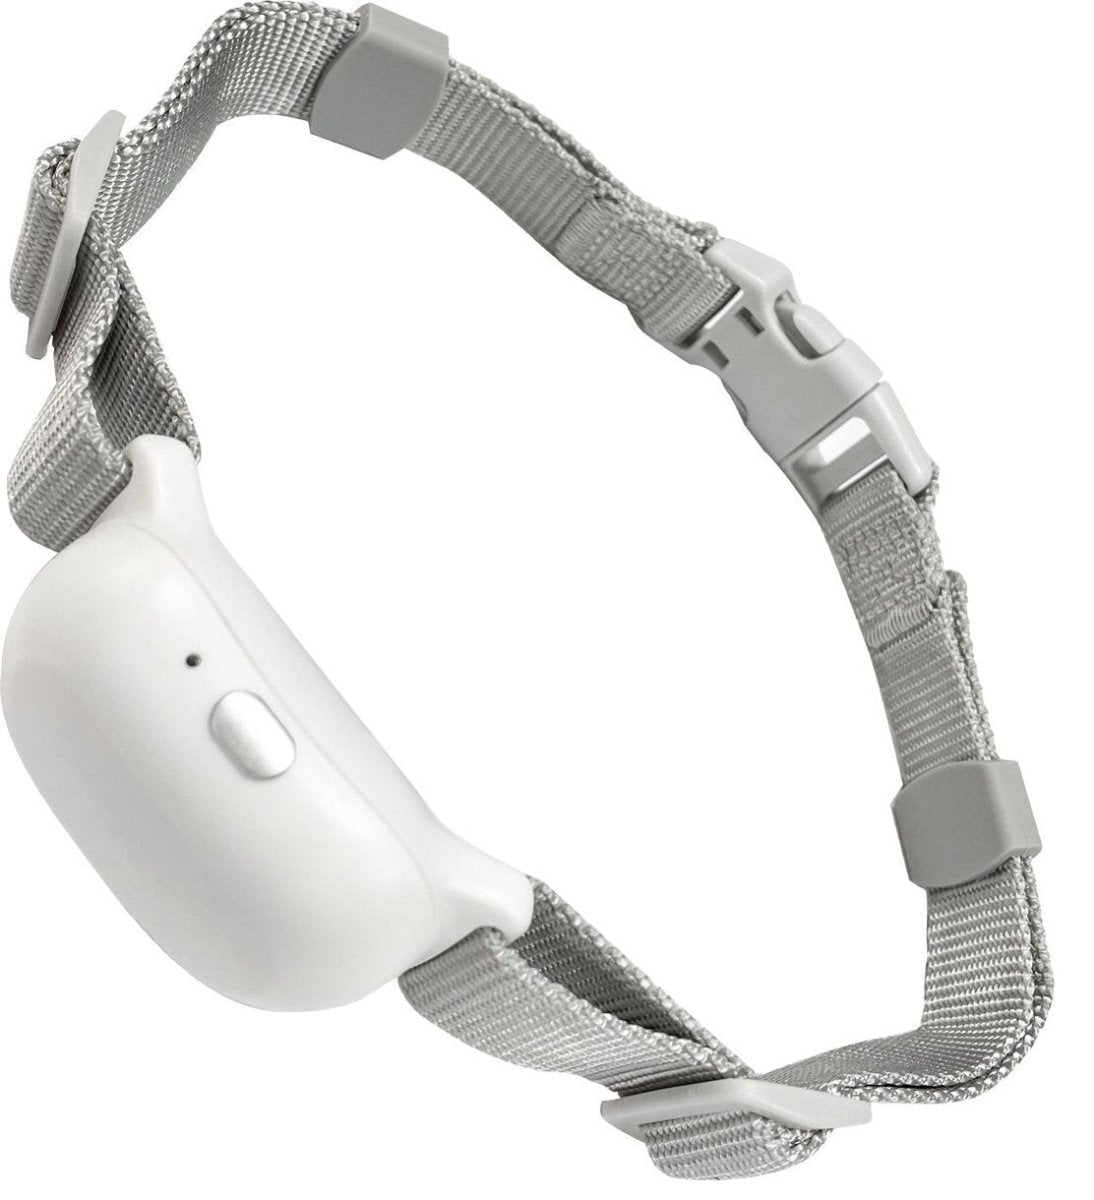 Dog Training Collar with Remote T200 White - 2 Dog Set, IPX68 Waterproof, 1000ft Range - Pawious